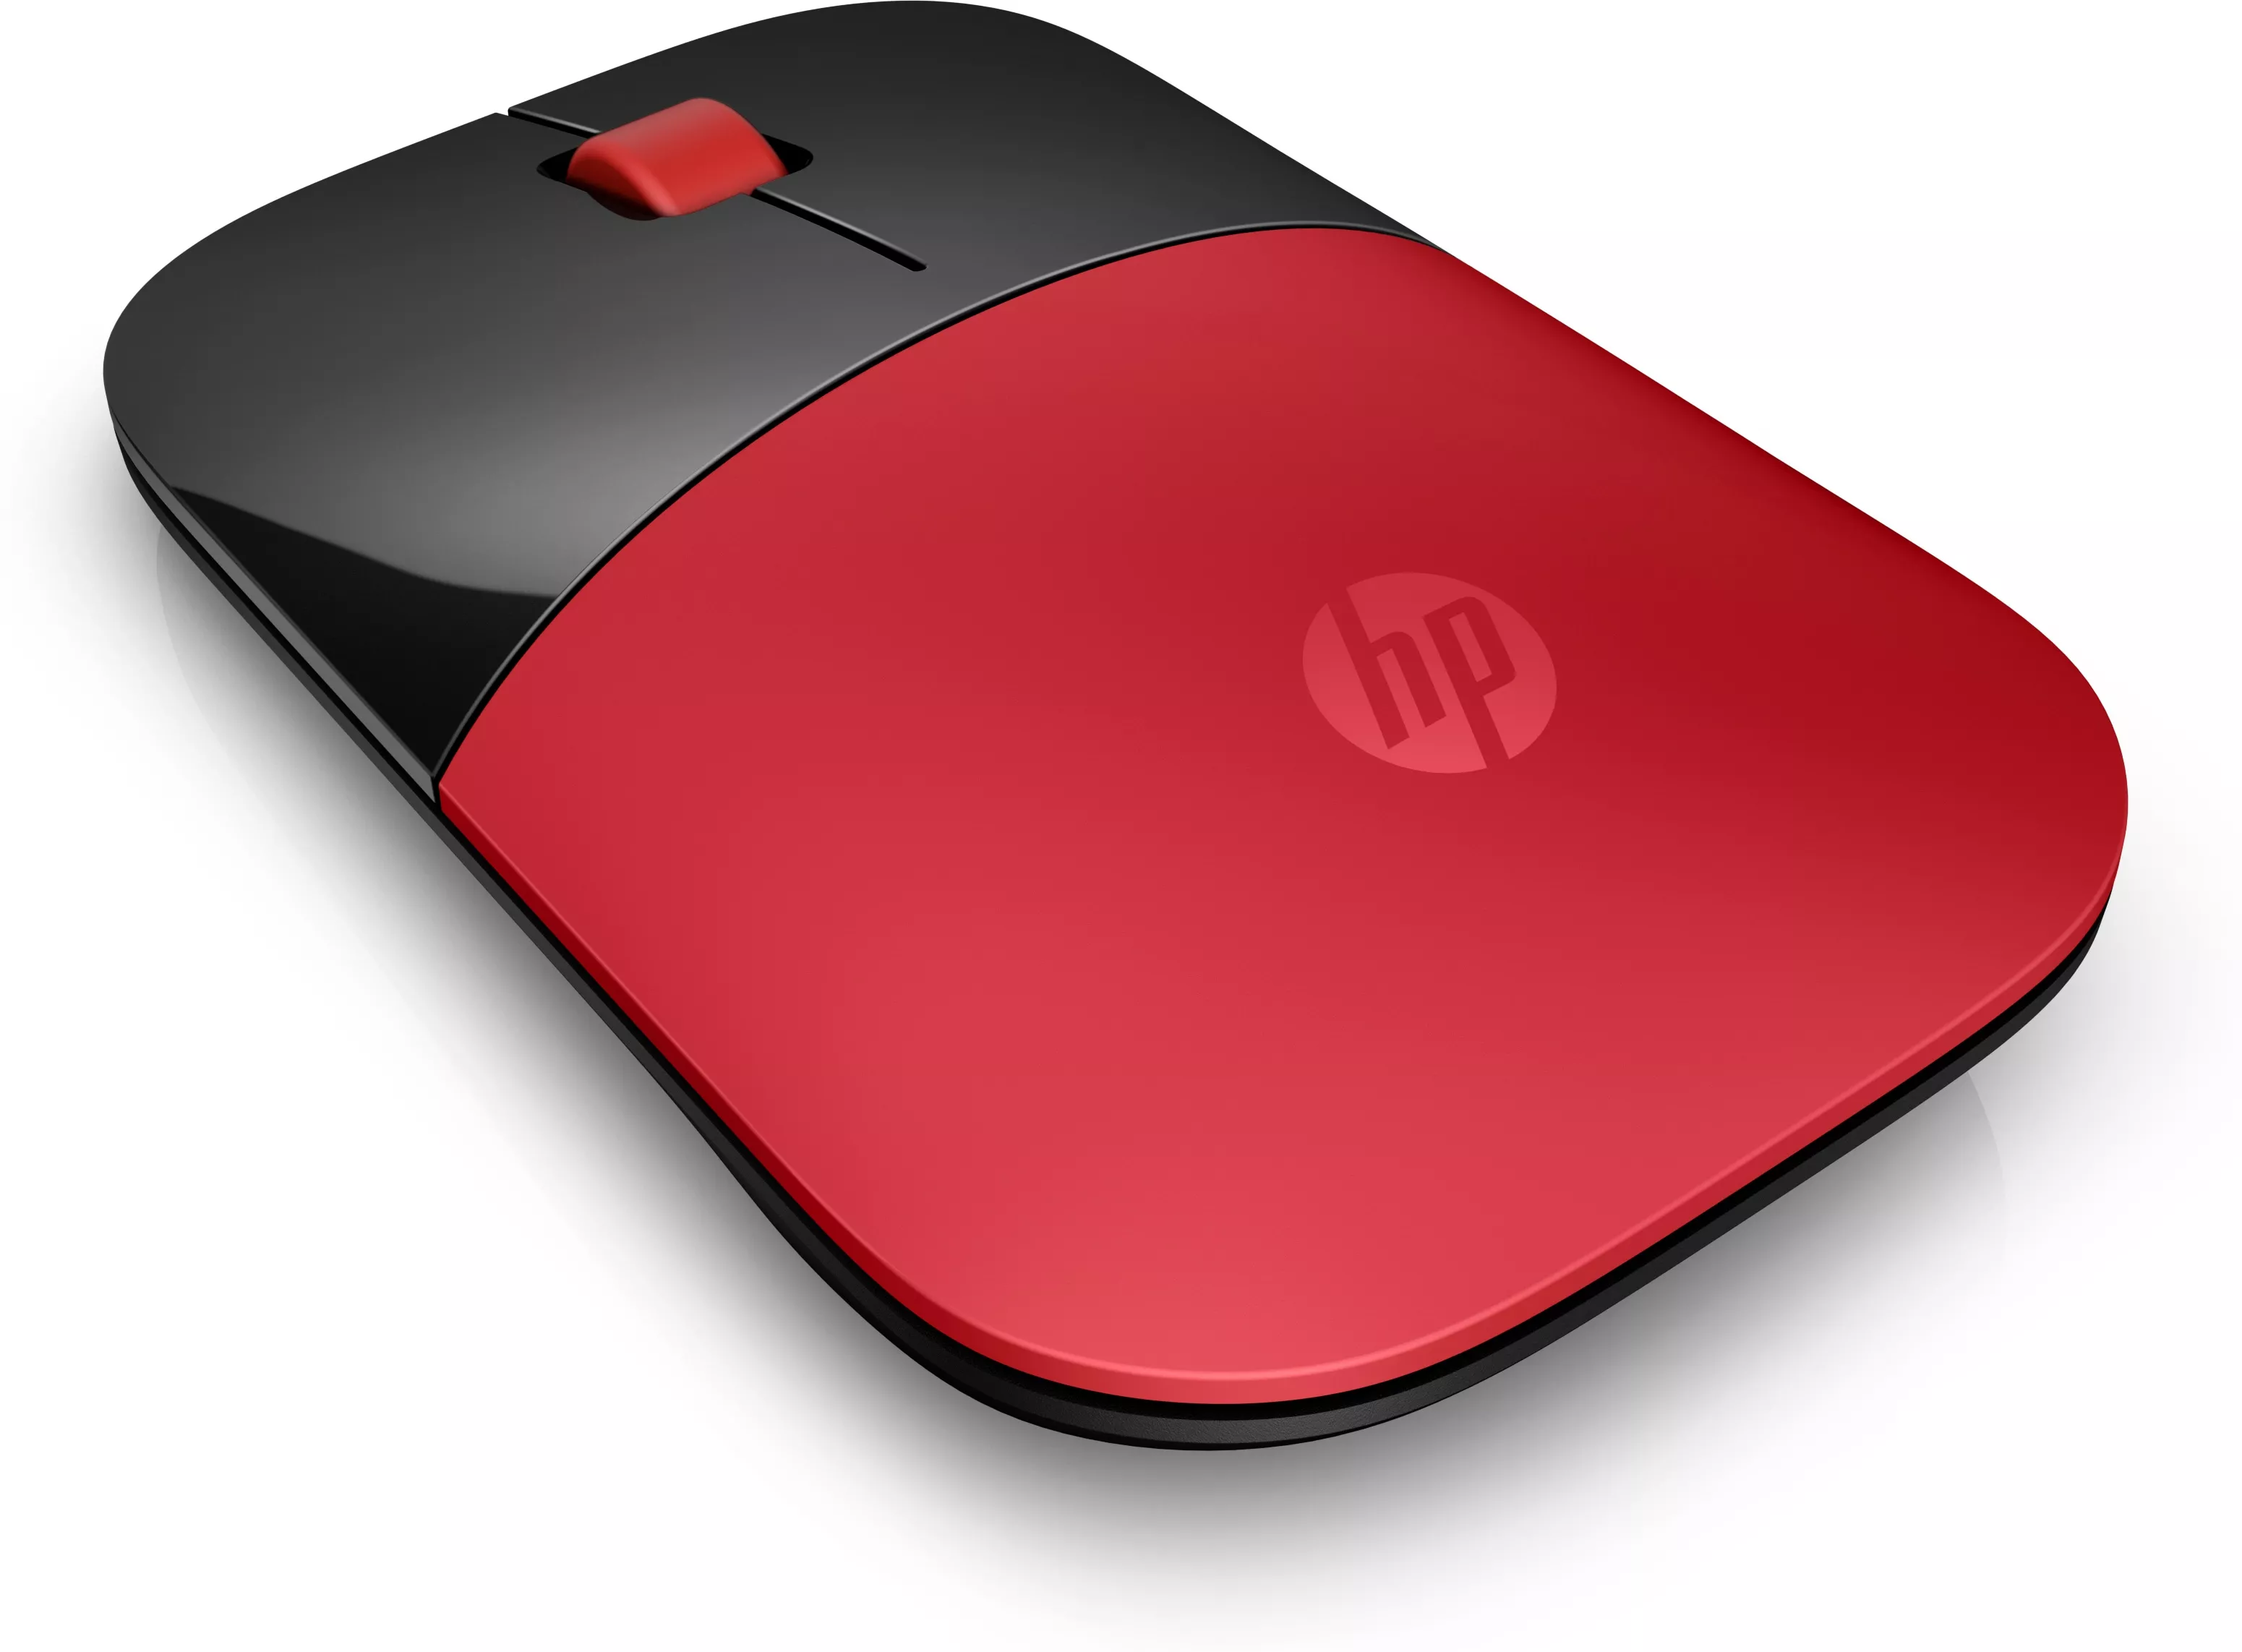 Achat HP Z3700 Wireless Mouse Cardinal Red sur hello RSE - visuel 7